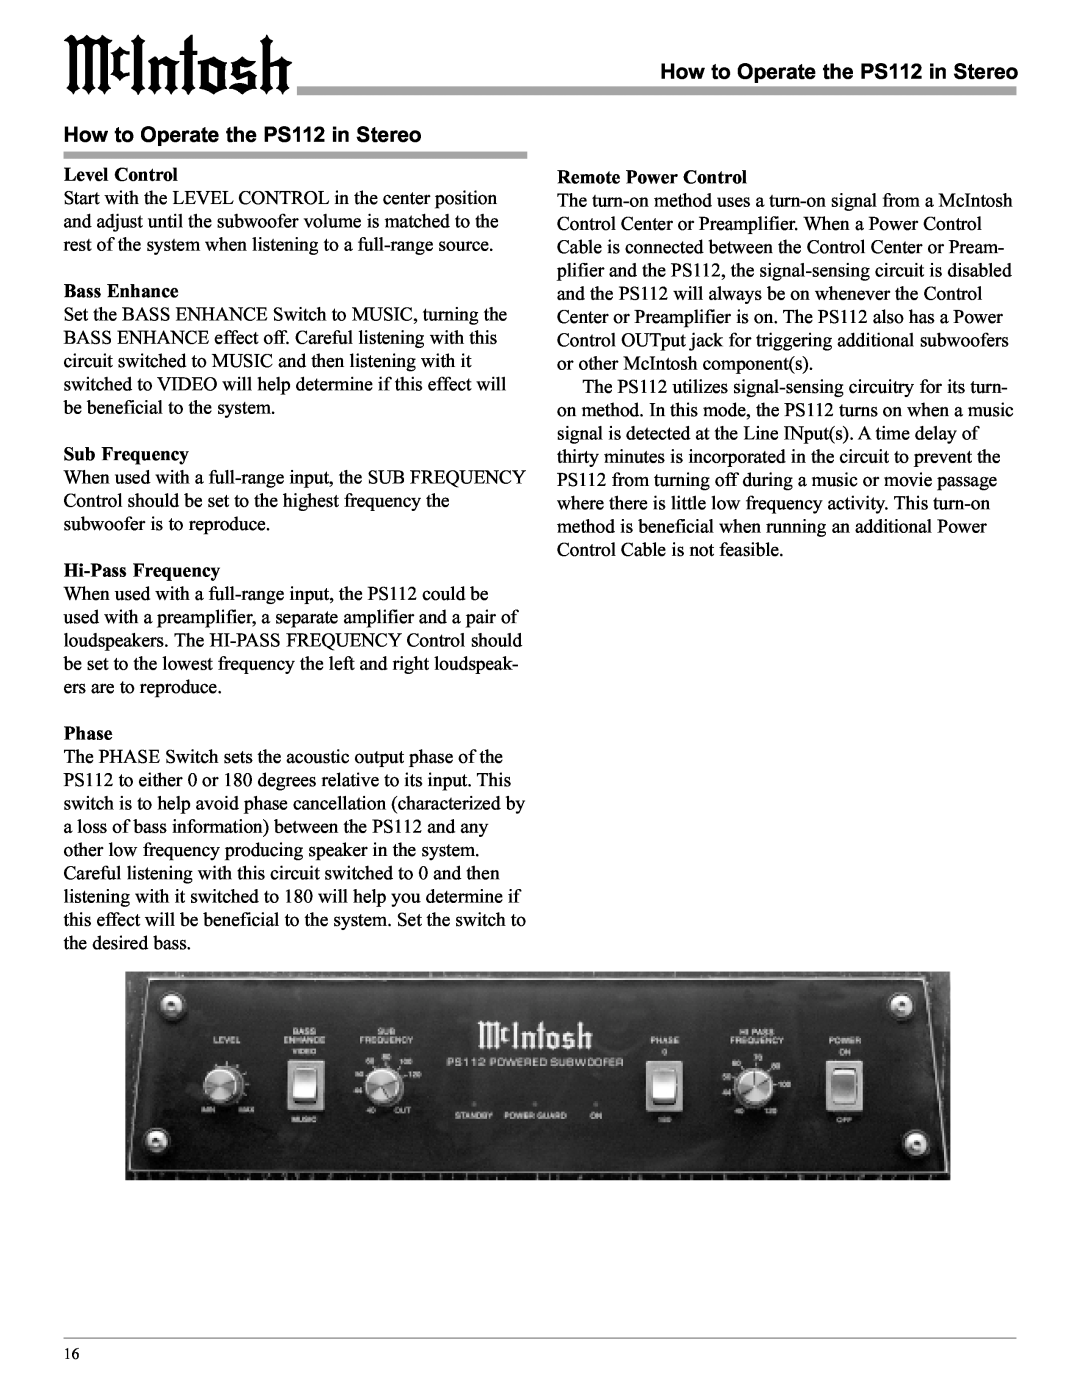 McIntosh manual How to Operate the PS112 in Stereo 